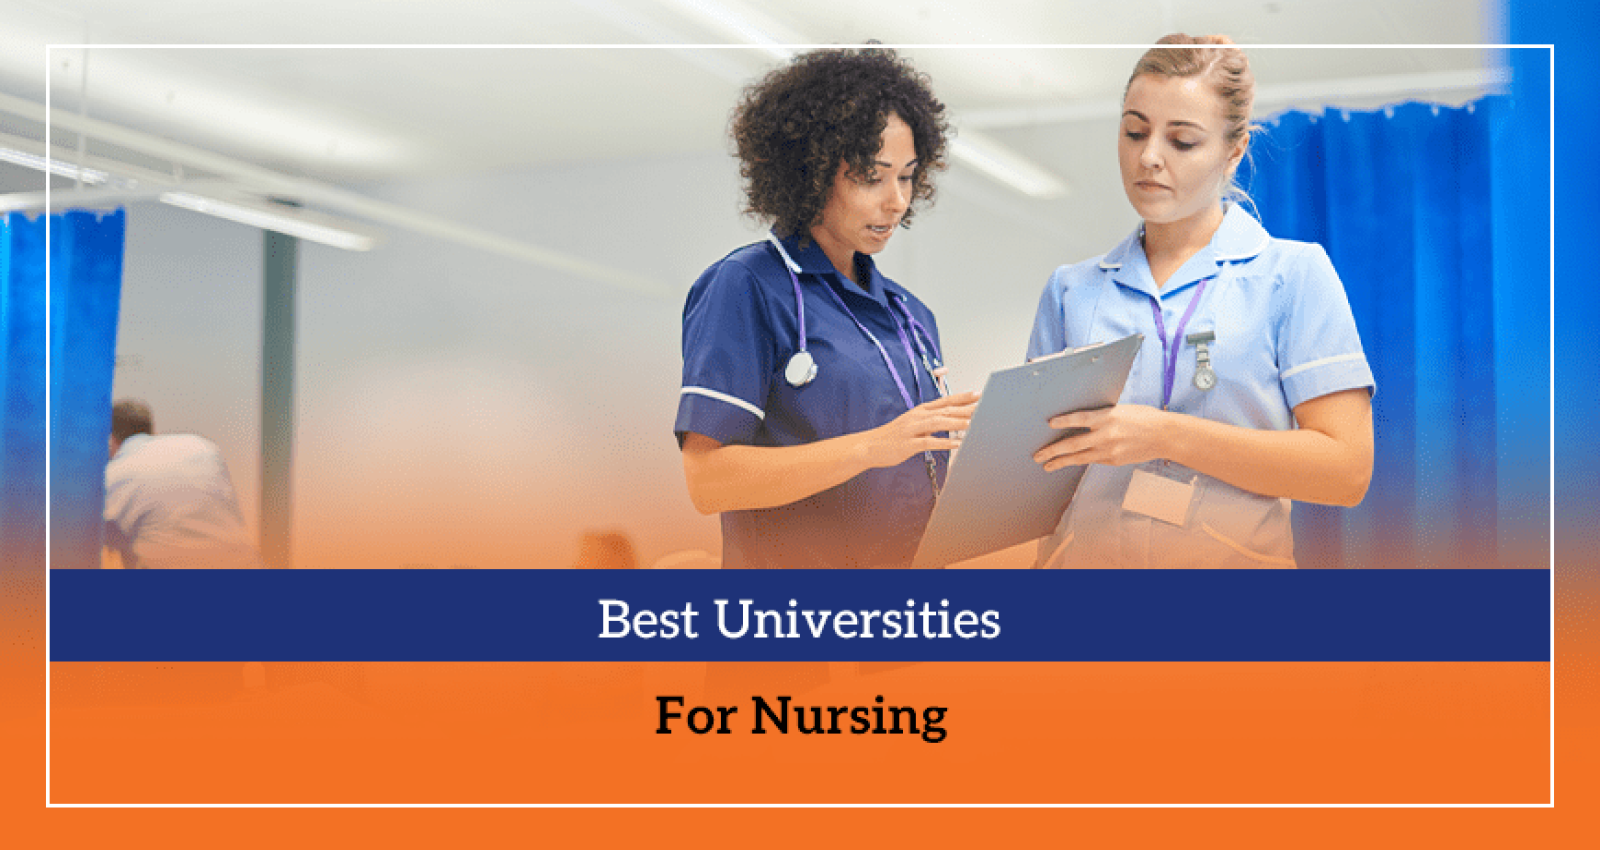 https://bheuni.io/backend/images/blog/best-universities-for-nursing-png76.png